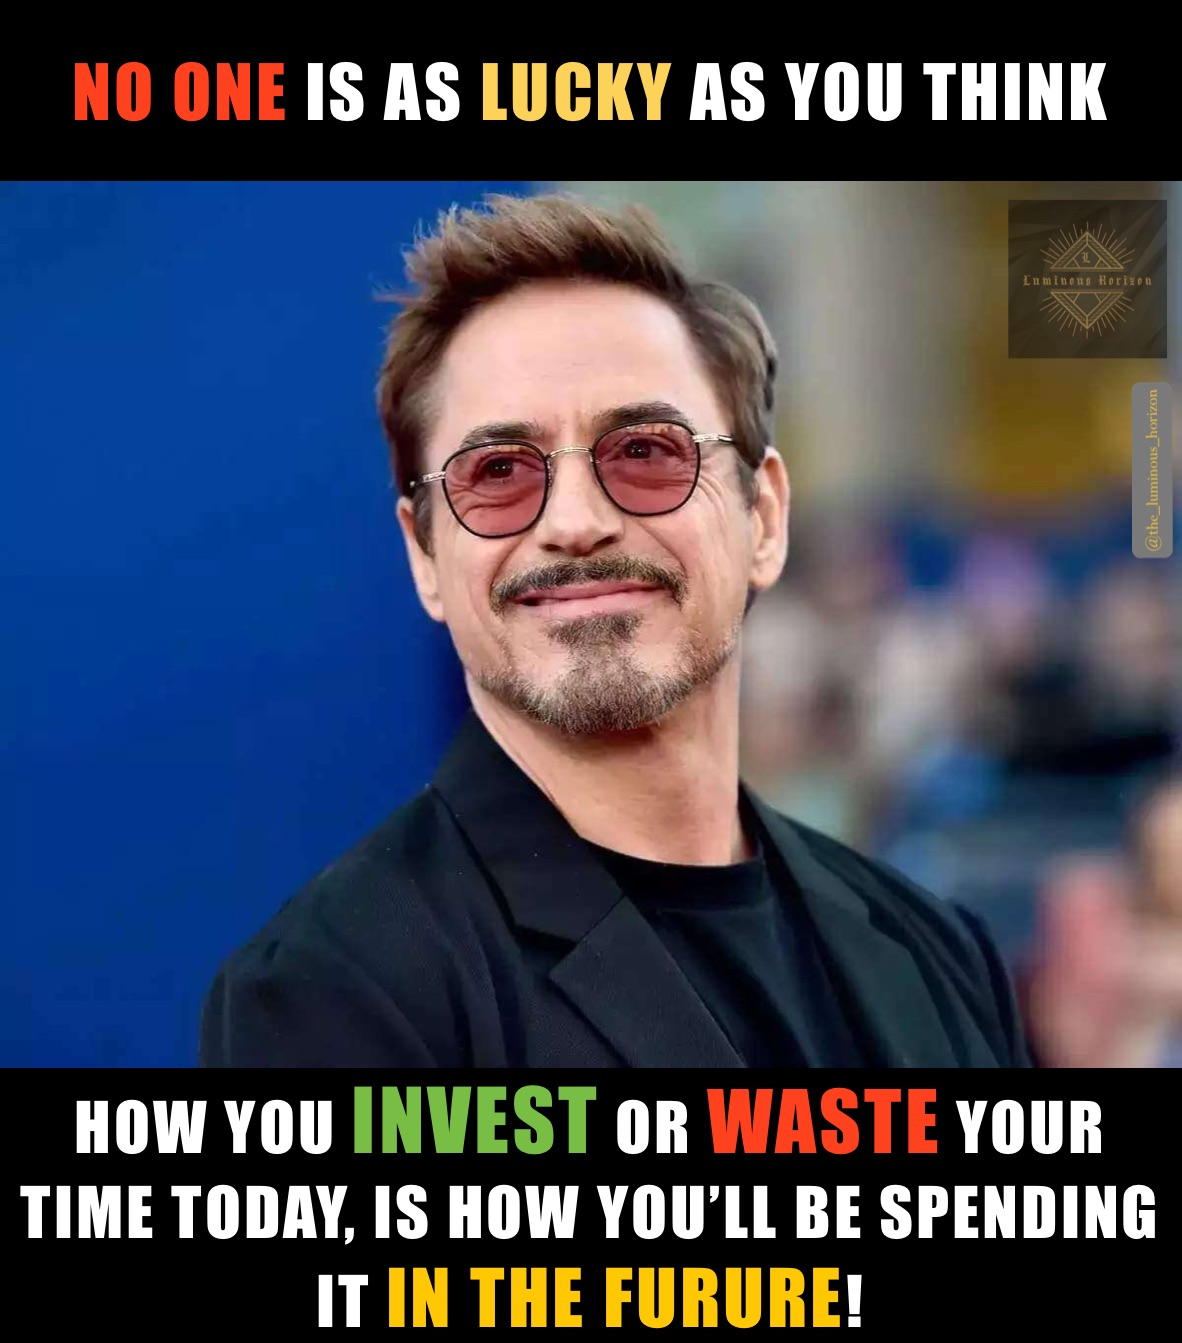 NO ONE IS AS LUCKY AS YOU THINK HOW YOU INVEST OR WASTE YOUR TIME TODAY, IS HOW YOU’LL BE SPENDING IT IN THE FURURE! No one is as lucky as you think. What you do with your time determines how you’ll be spending it, in your future. ok 